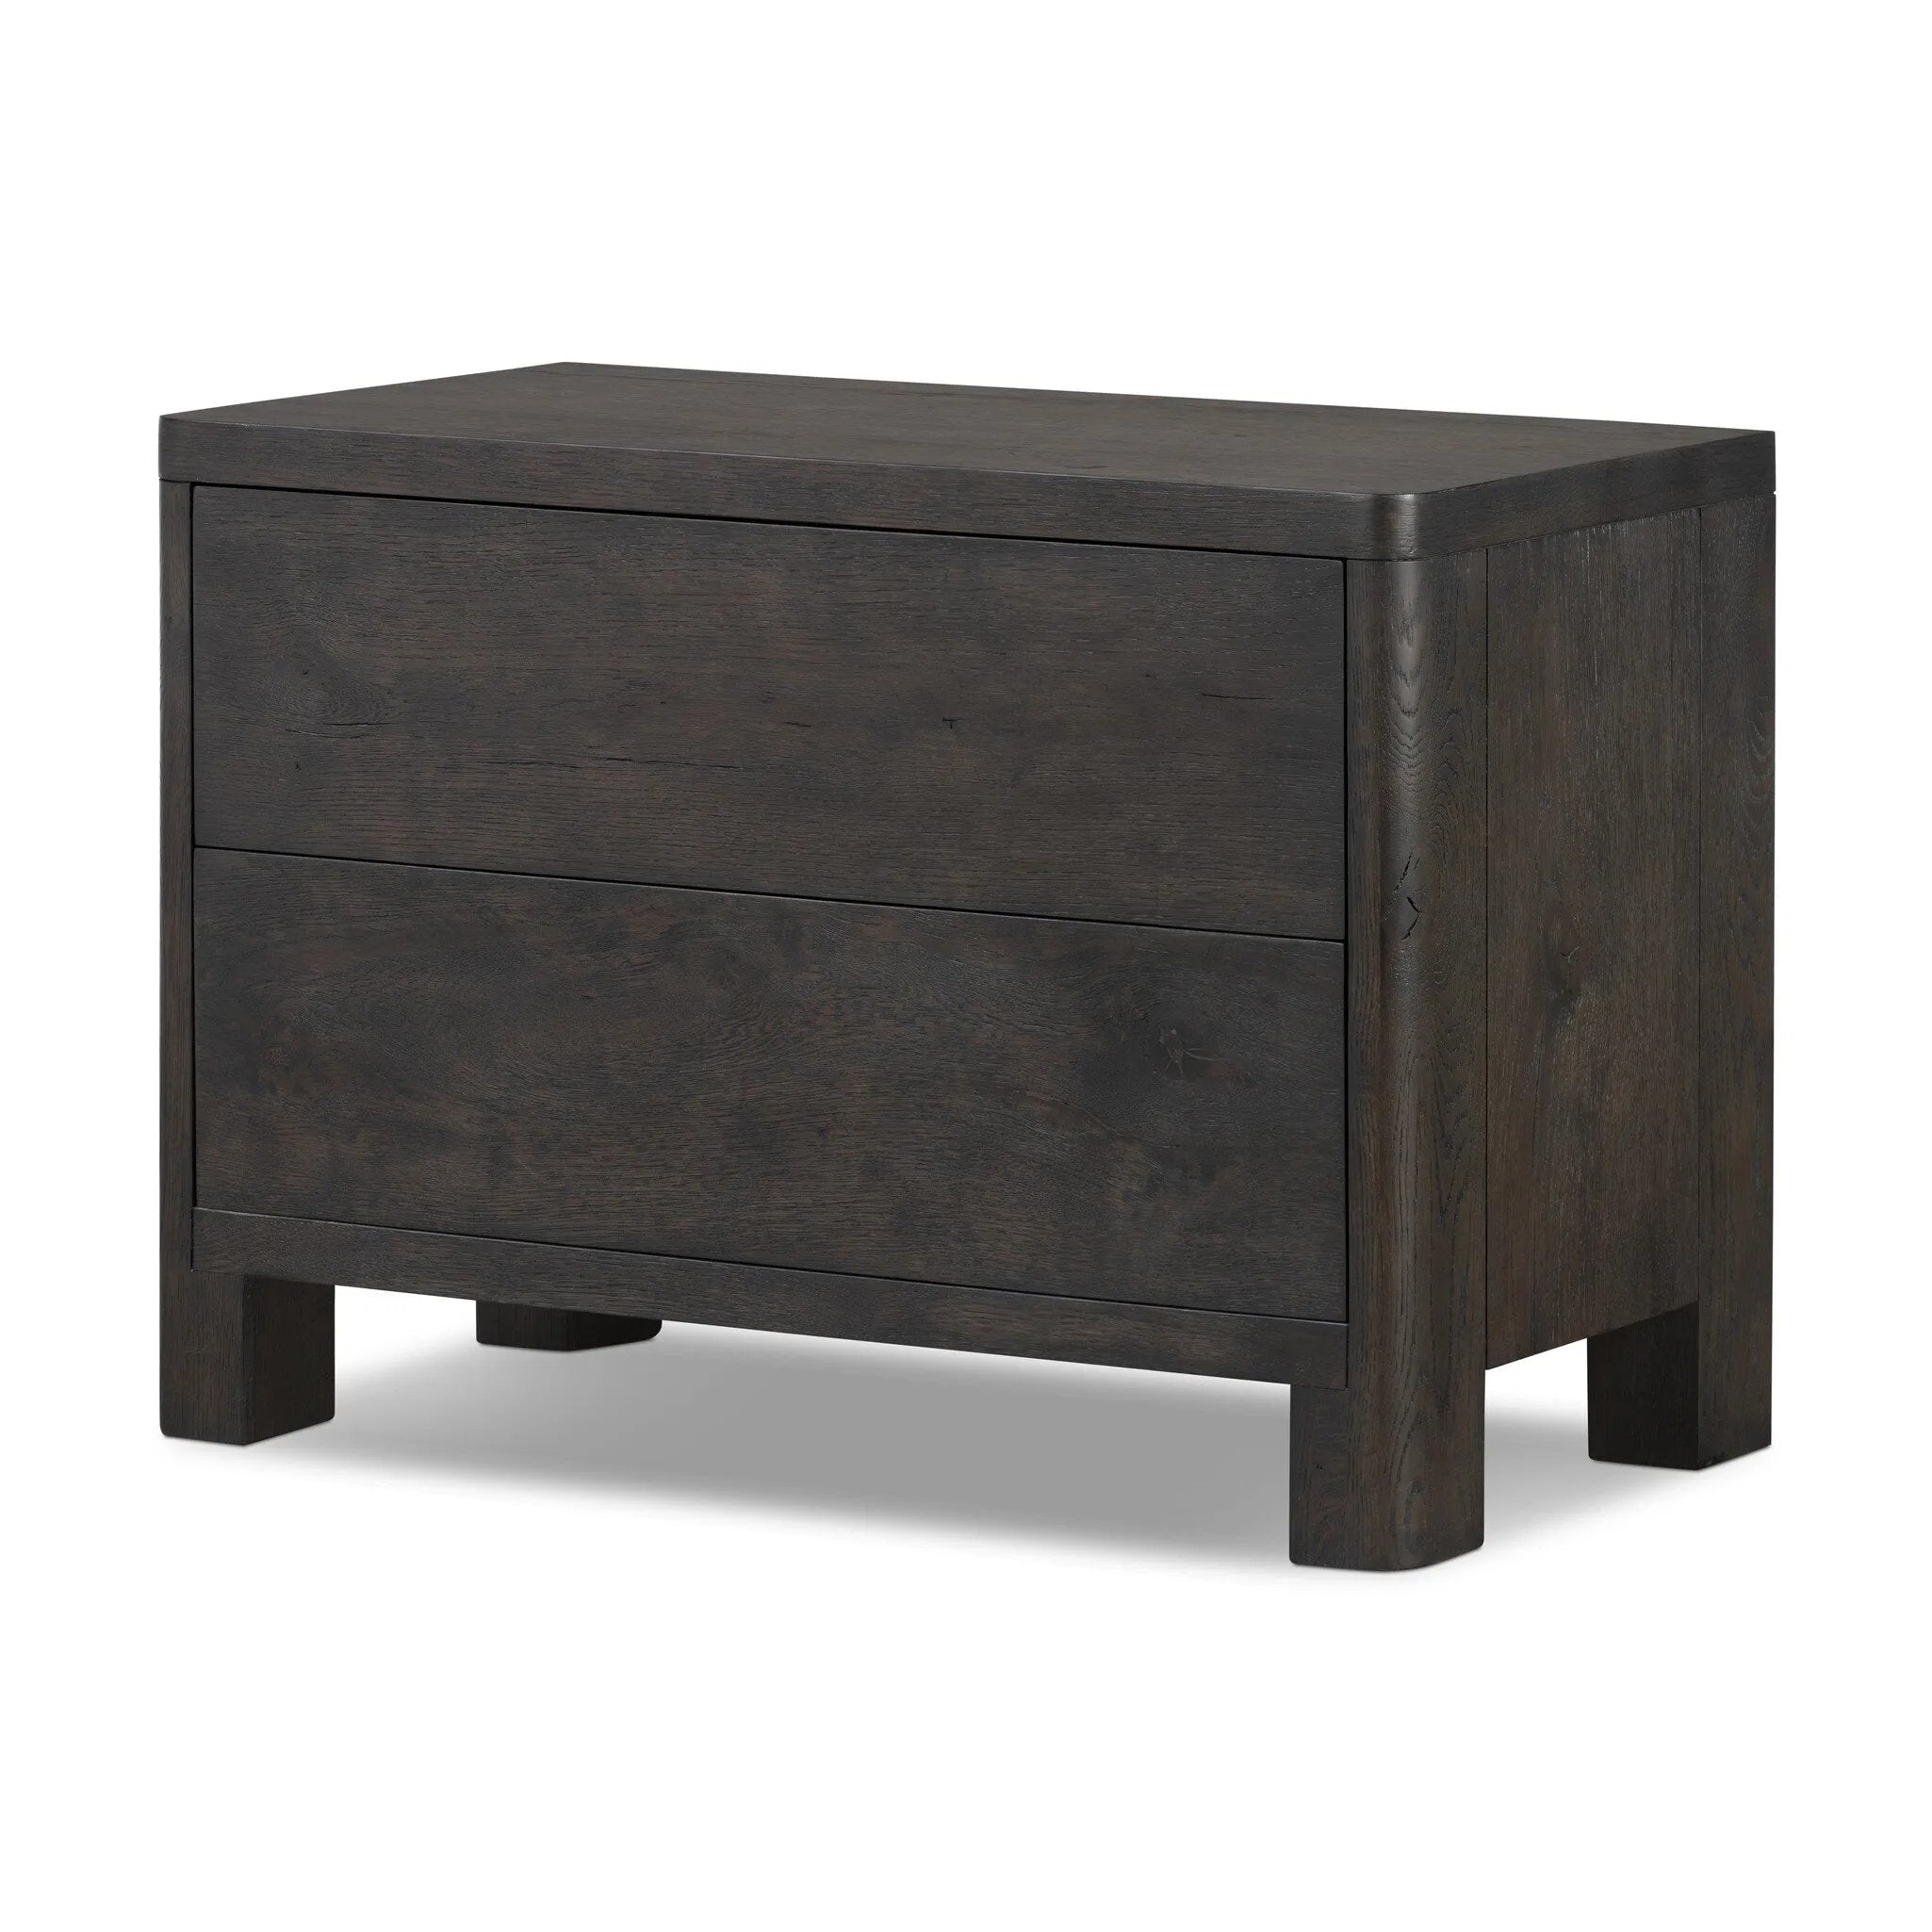 Topped with a thick plank of solid oak, this extra-wide nightstand blends modern lines and warm character with two roomy drawers, slightly curved corners, and solid square legs. Seamless drawer fronts have a push-latch mechanism. Made from solid oak and veneer in a smoky black finish.Collection: Bolto Amethyst Home provides interior design, new home construction design consulting, vintage area rugs, and lighting in the Alpharetta metro area.